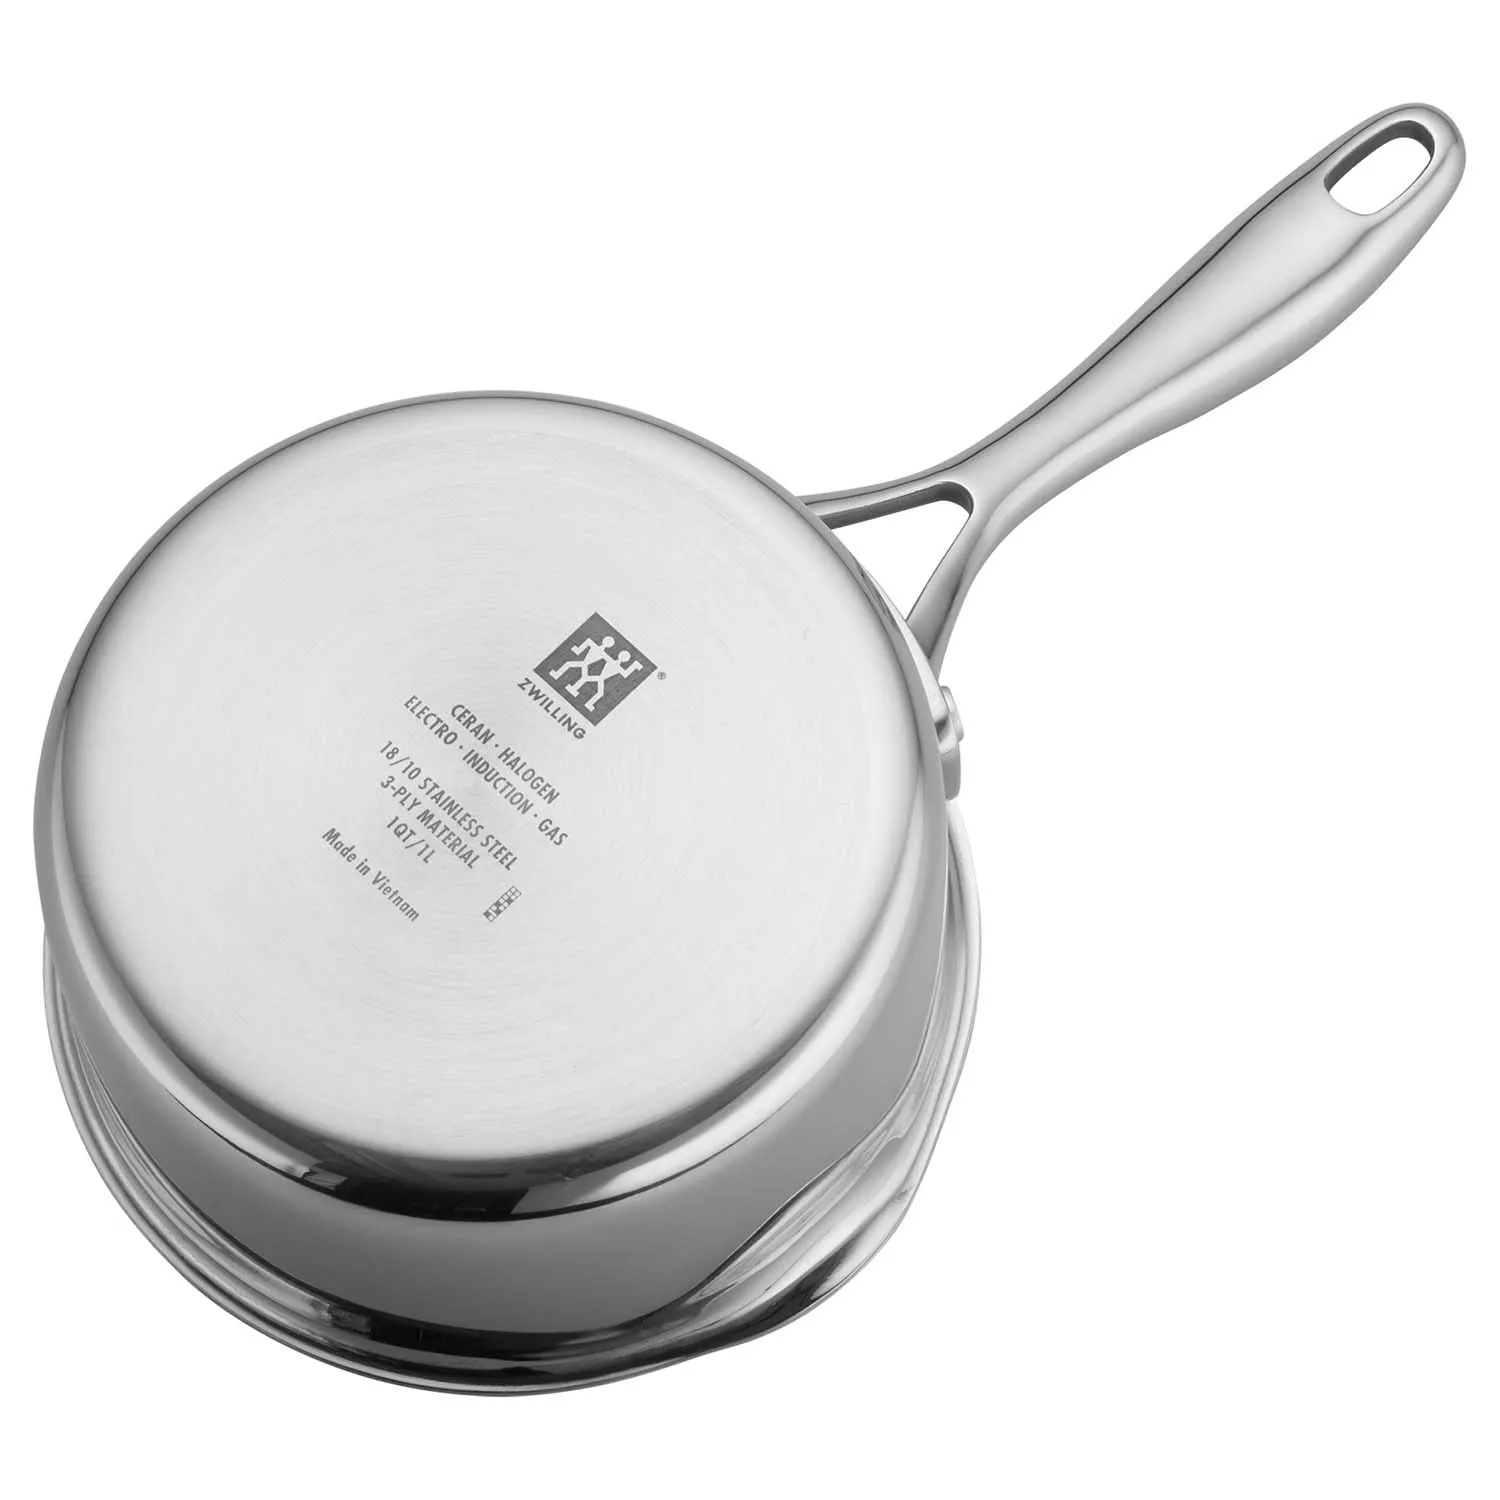 ZWILLING Clad CFX 10-pc, Non-stick, Stainless Steel Ceramic Cookware Set